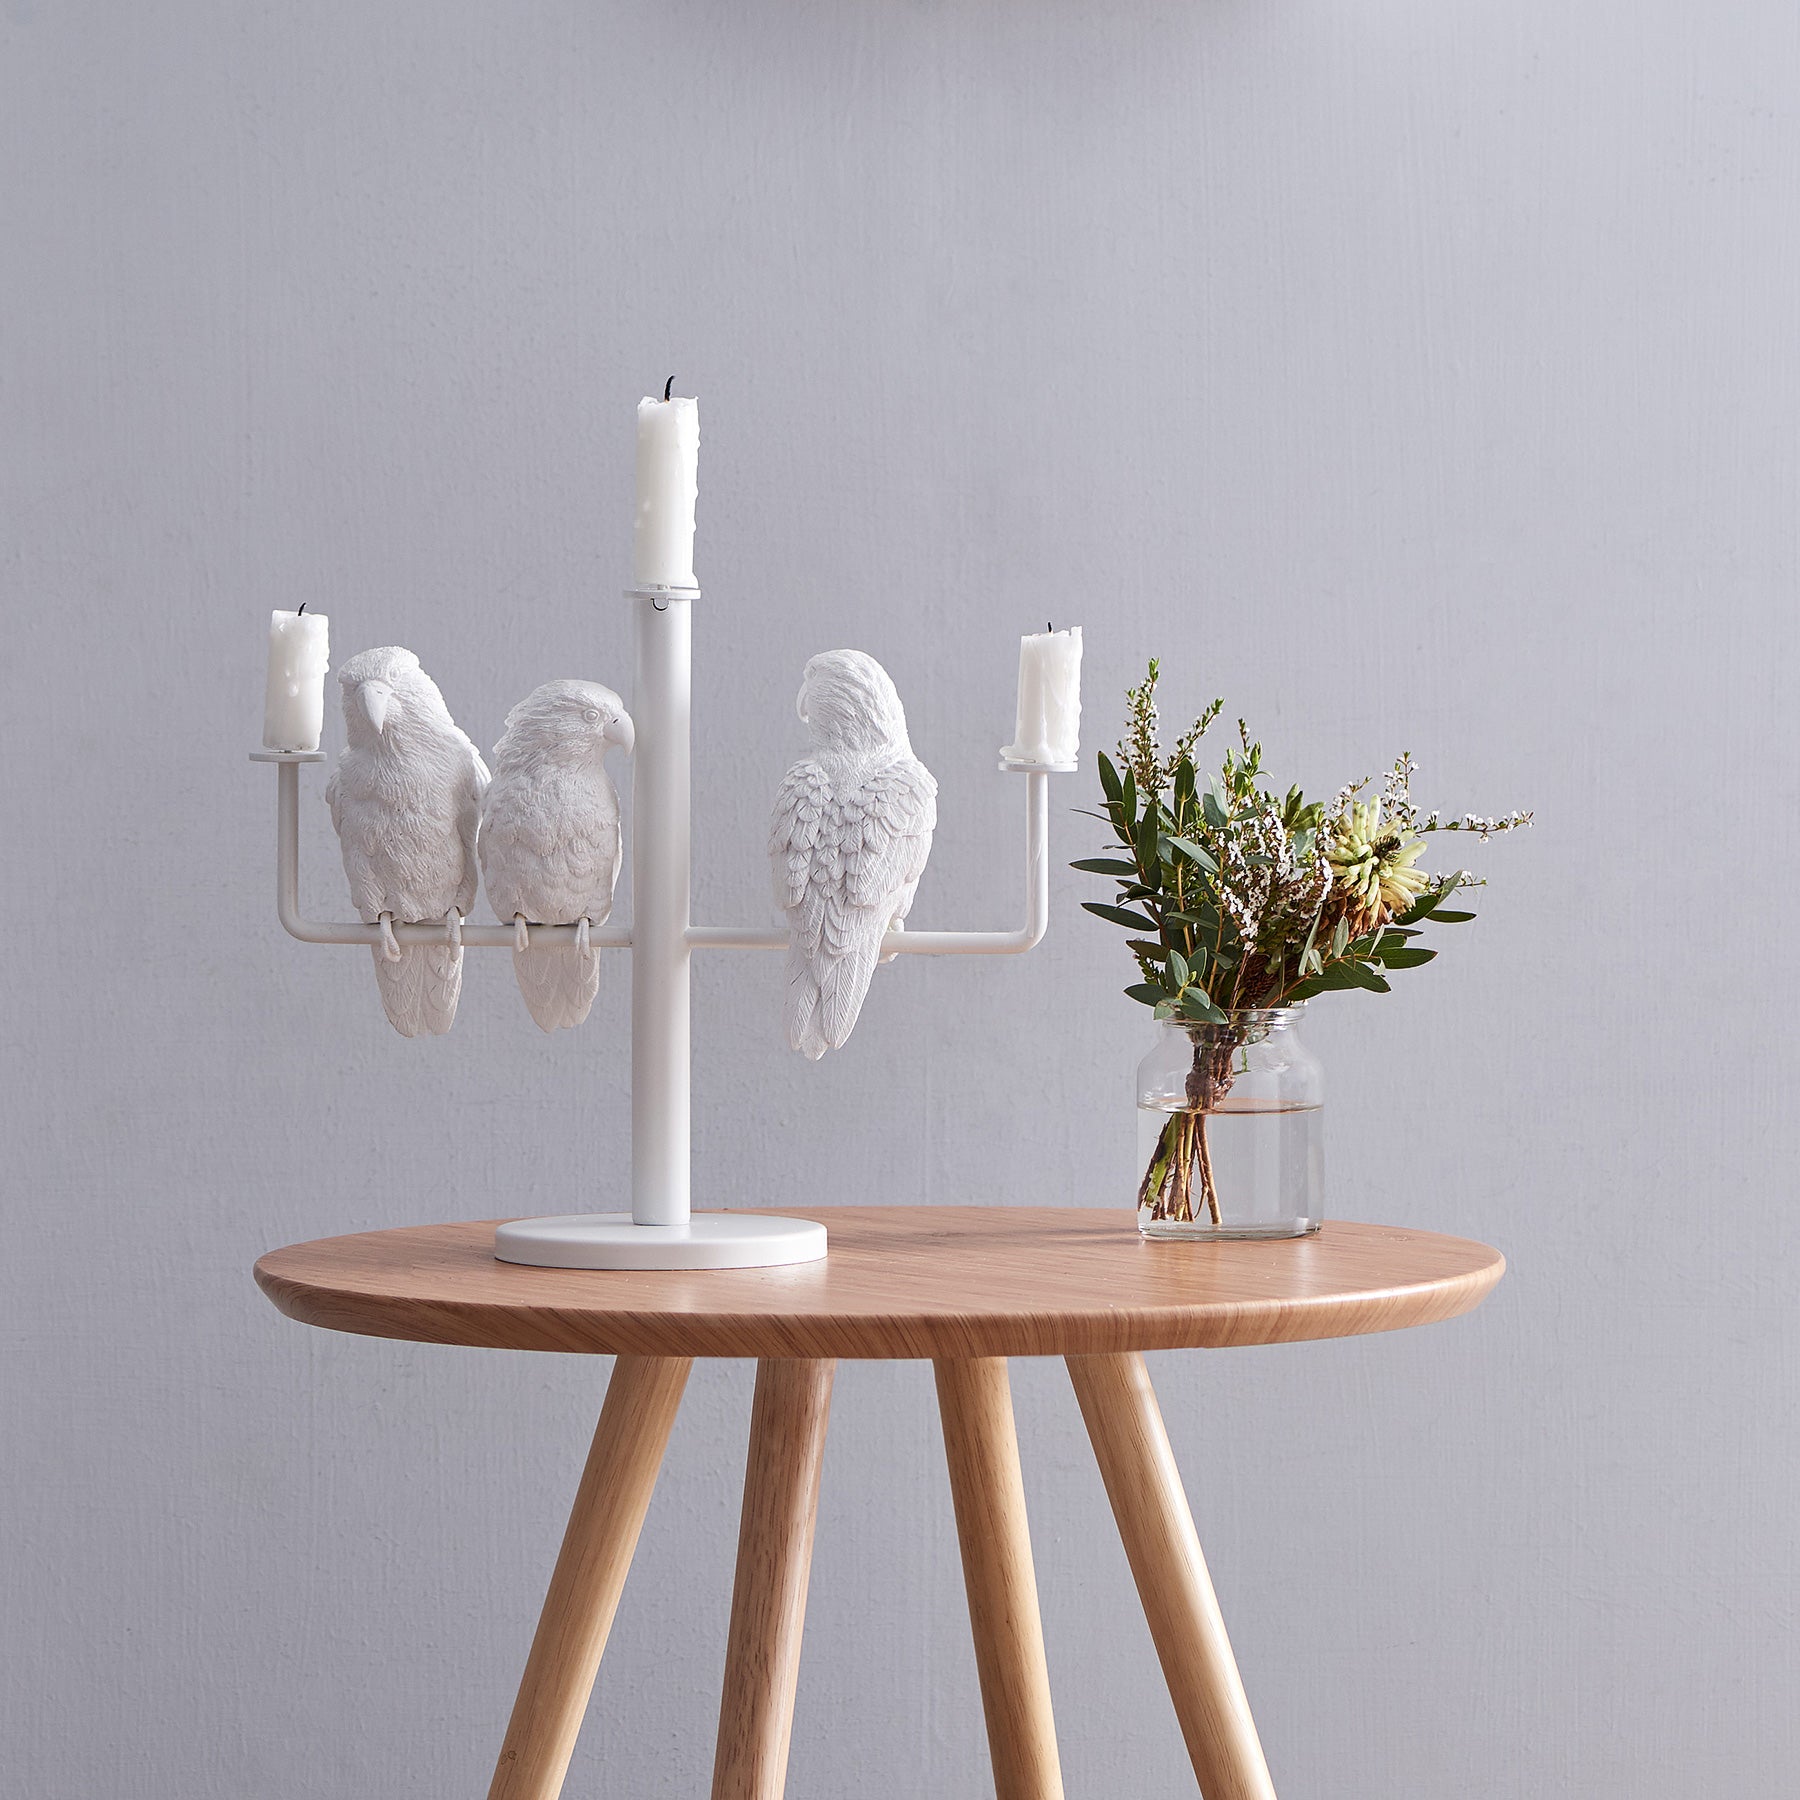 White Candle Holder for 3 Three Candle with Resin Parrot Sculpture for Home Decor Accessories Invite Parrots to Chat or Dinner in Peace & Naturality